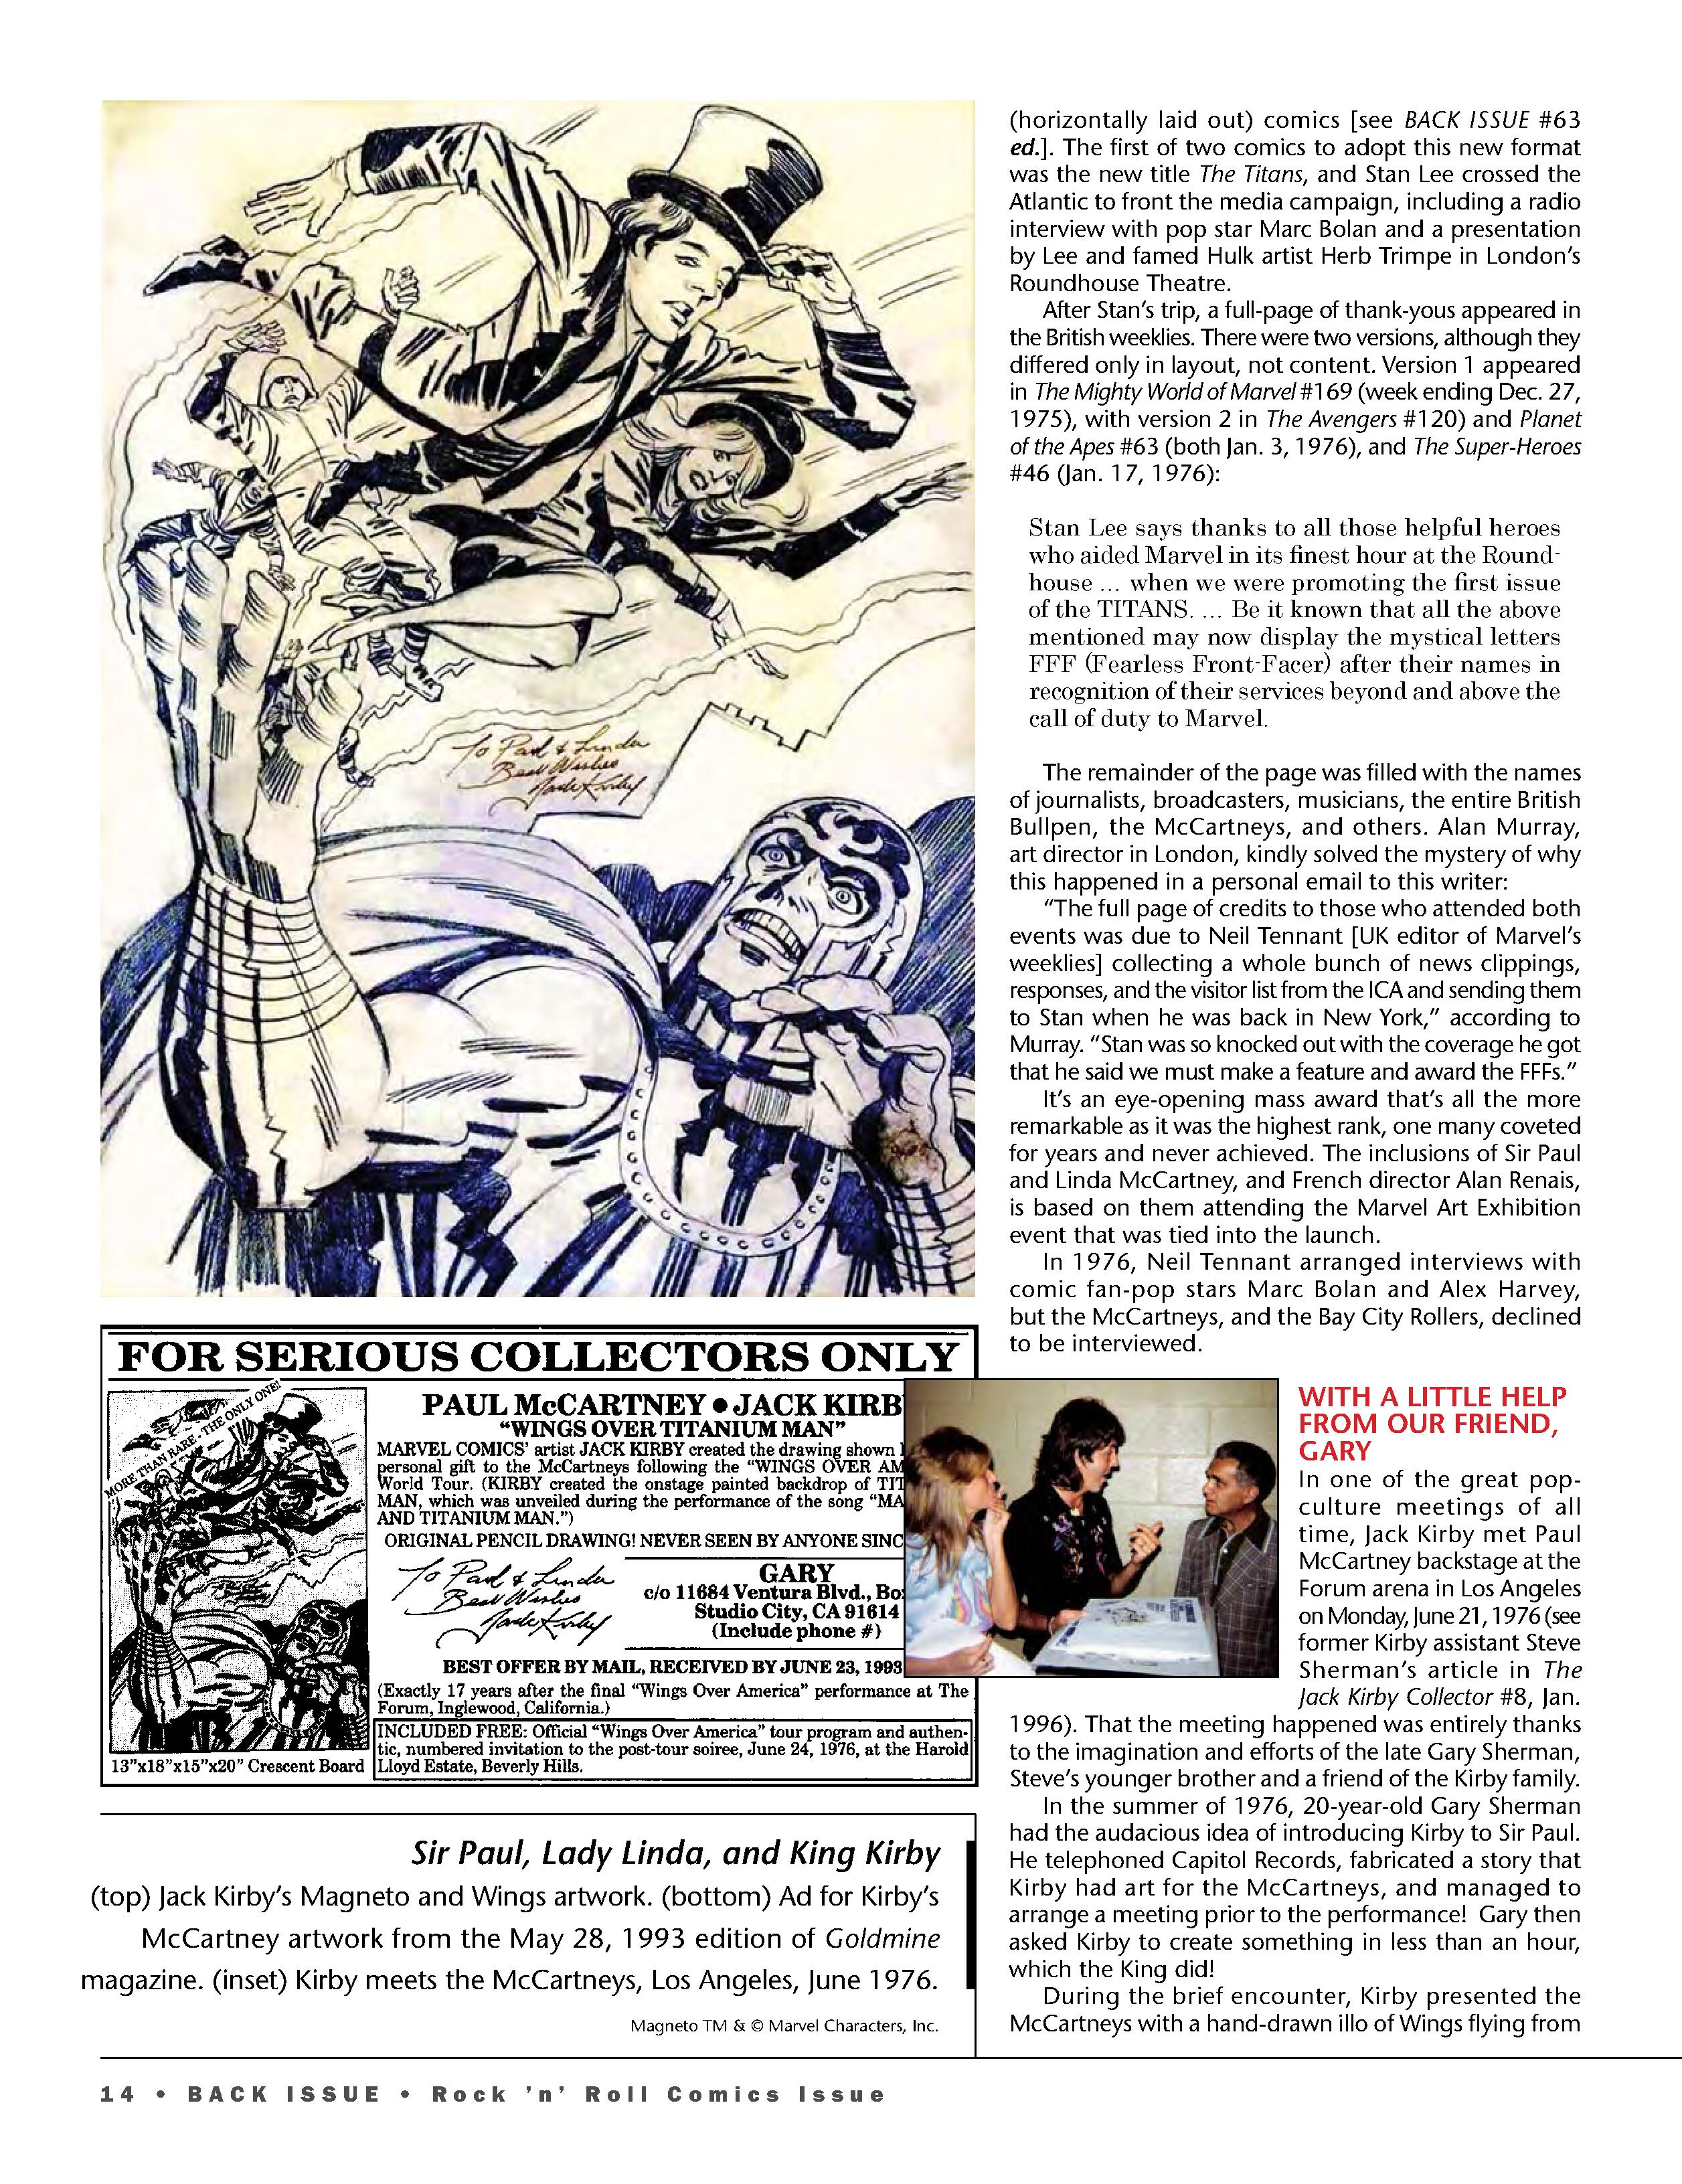 Read online Back Issue comic -  Issue #101 - 16